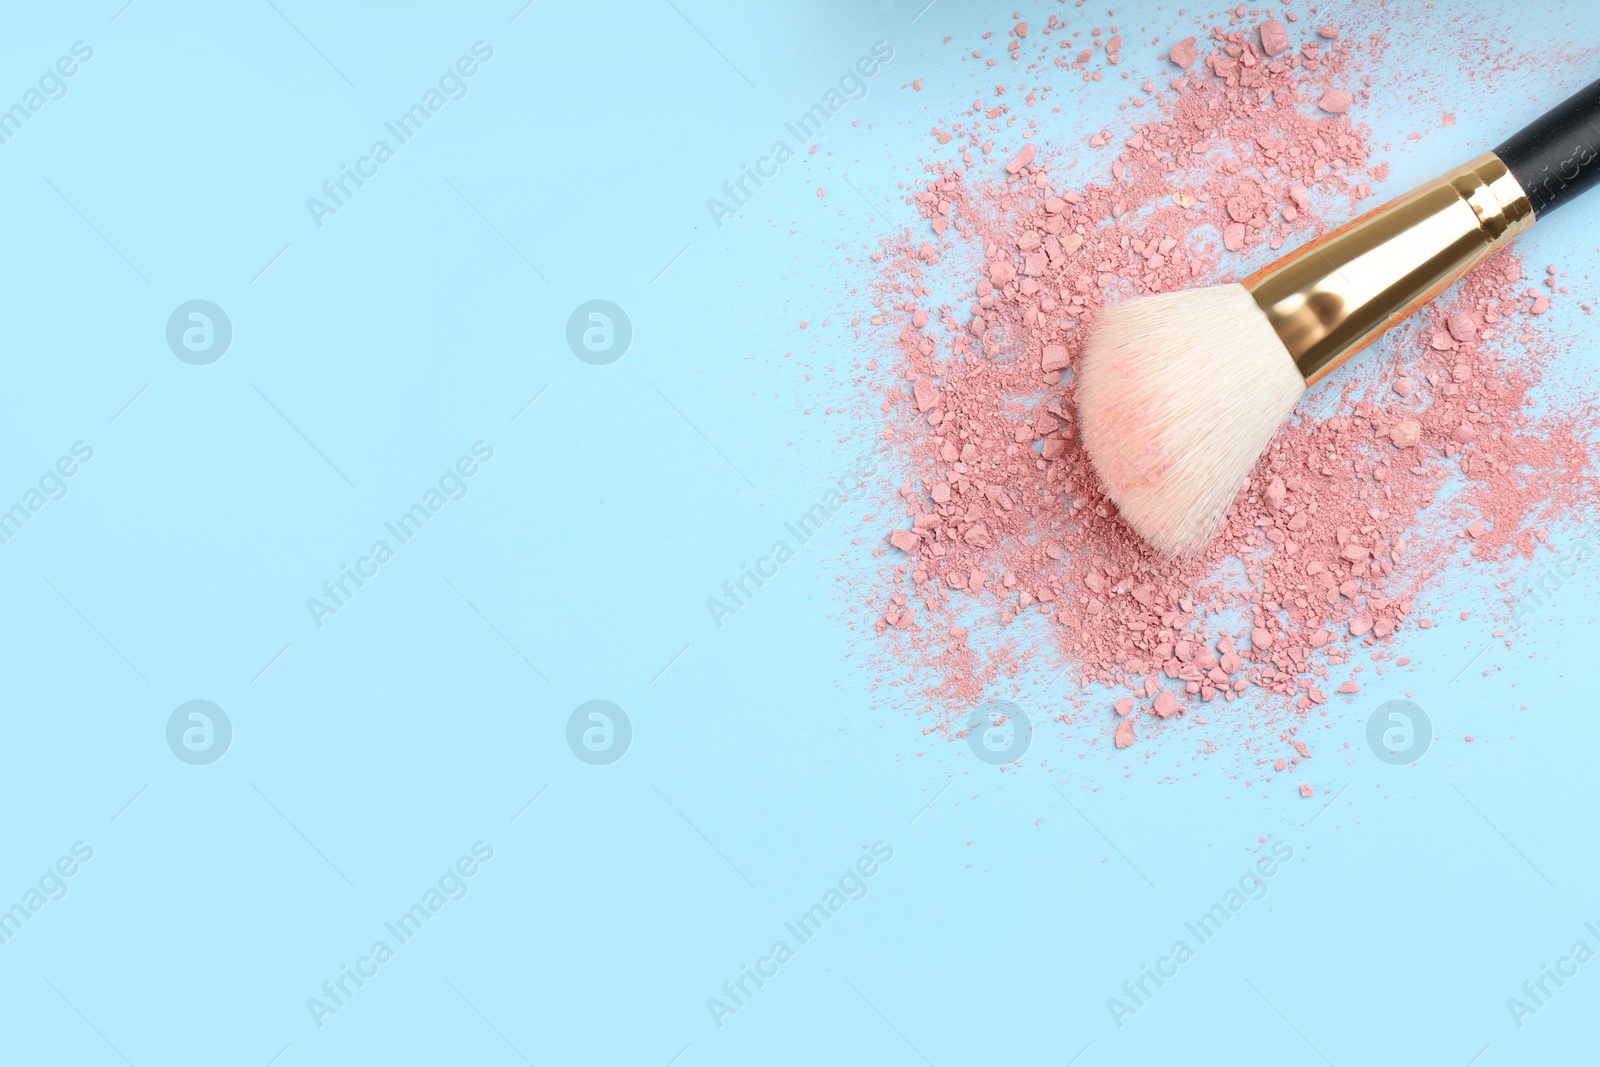 Photo of Makeup brush and scattered blush on light blue background, top view. Space for text